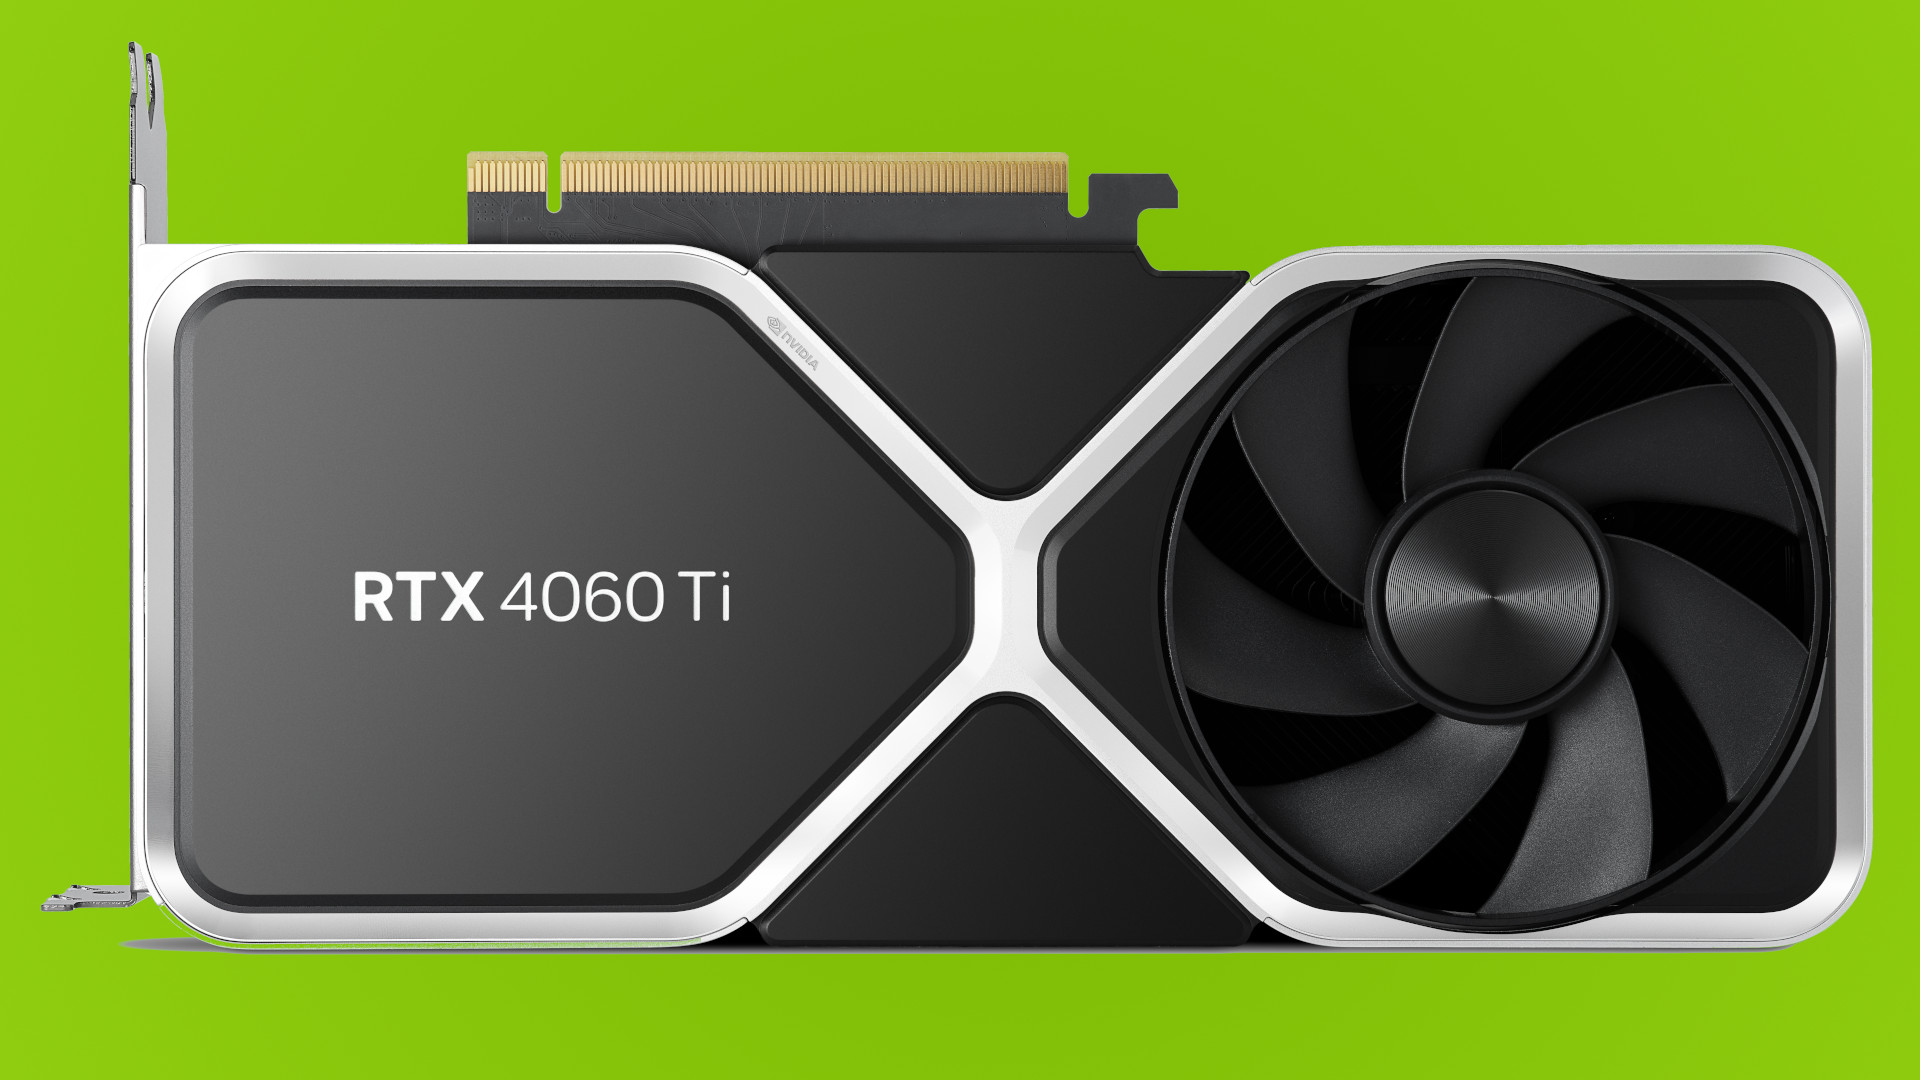 Nvidia announces RTX 4060 family of GPUs, pricing starts at $299